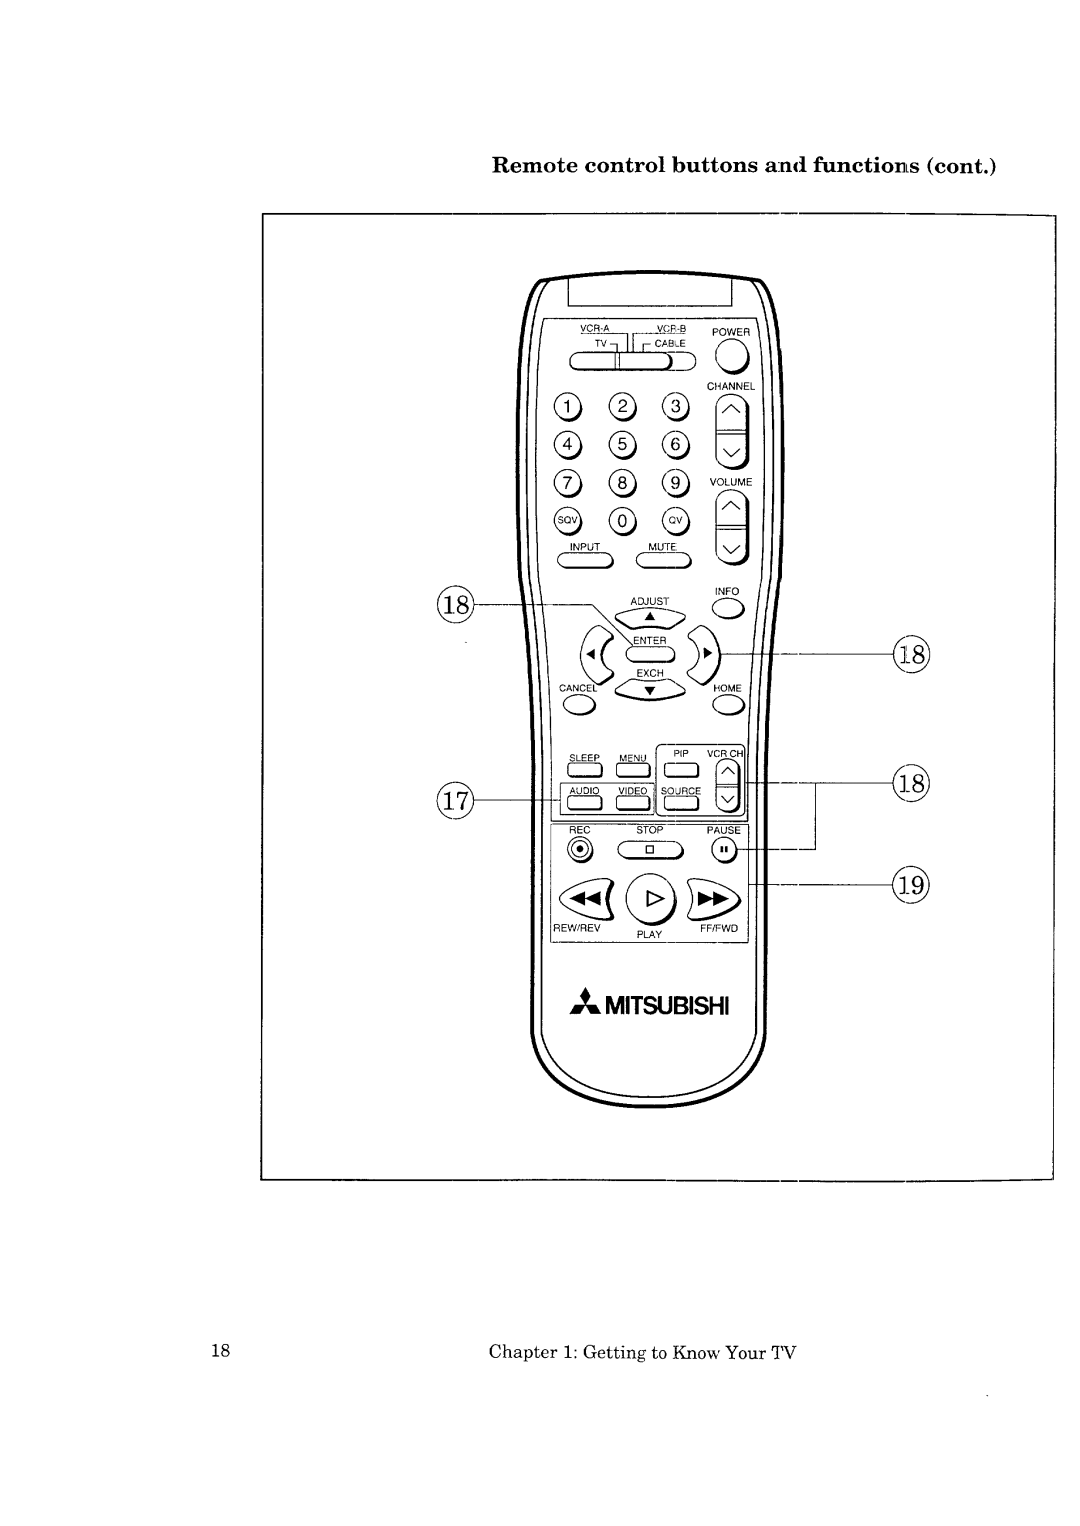 Mitsubishi Electronics CS-40307 = Mitsubishi, Remote control buttons and function, s cont, s.P#%, r---rTg--7, Info Adjust 